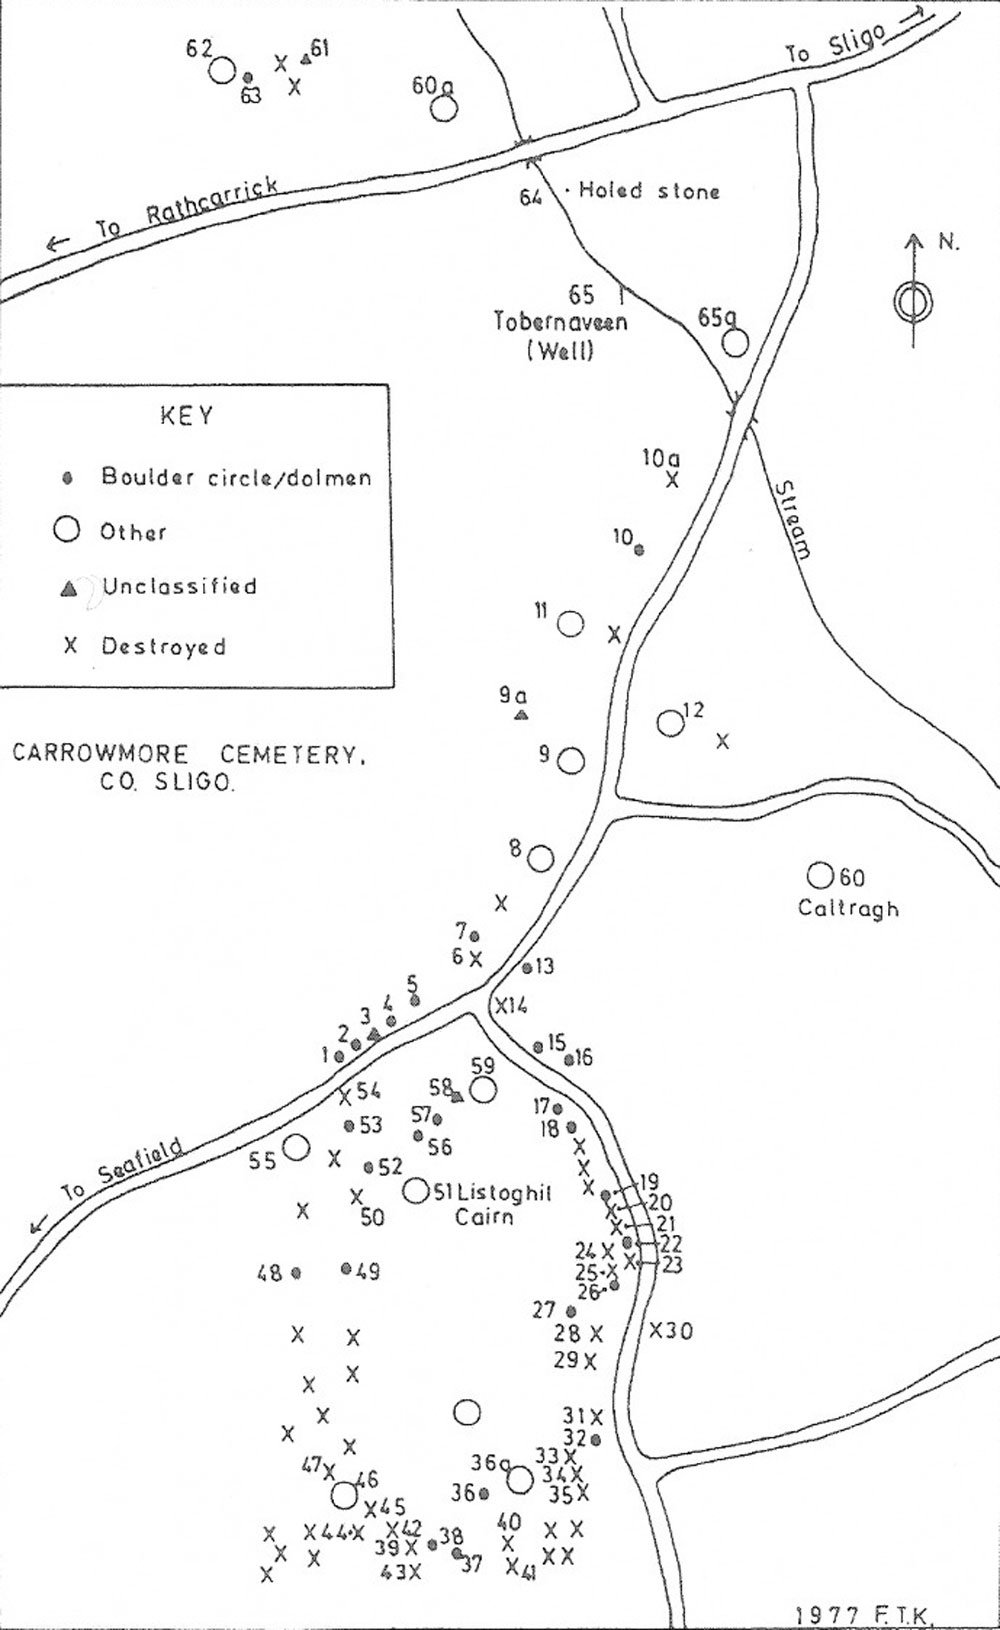 A 1977 map of Carrowmore.